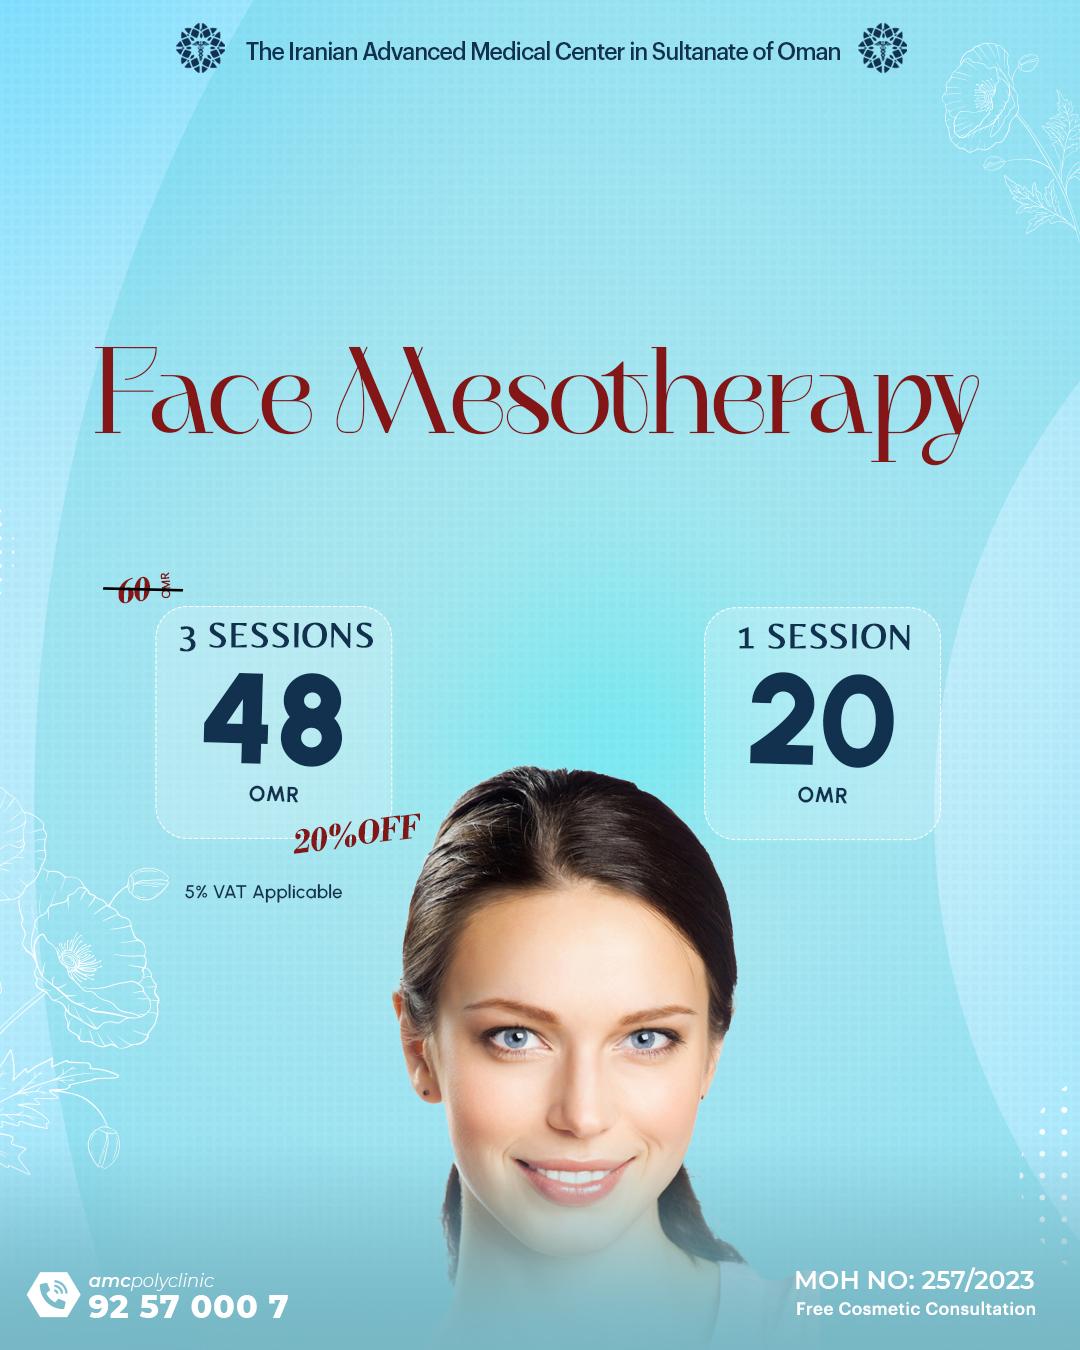 Face Mesotherapy